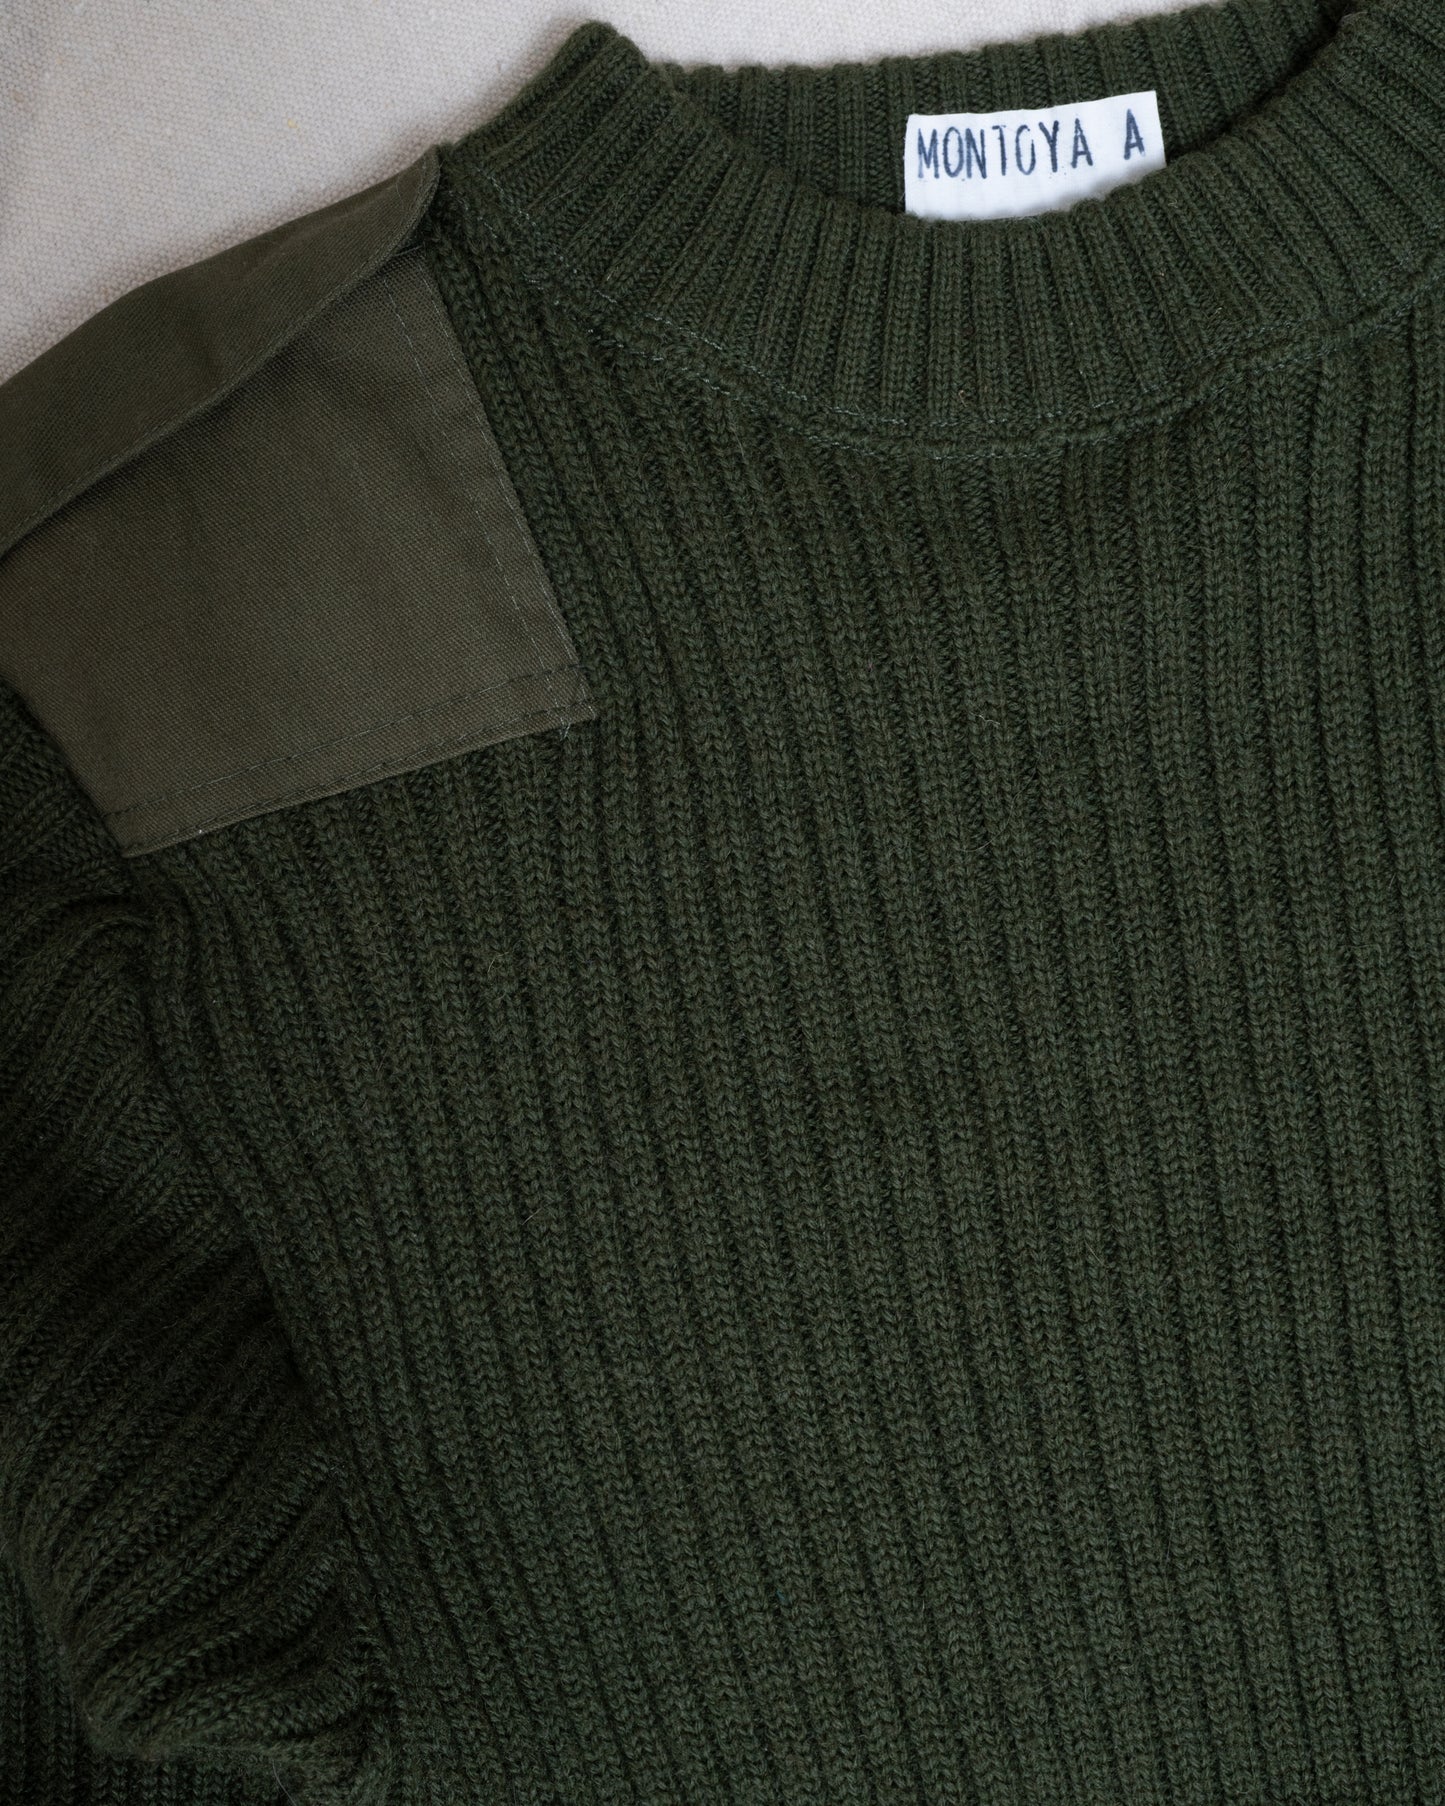 Vintage Knit Military Sweater (XS/S)